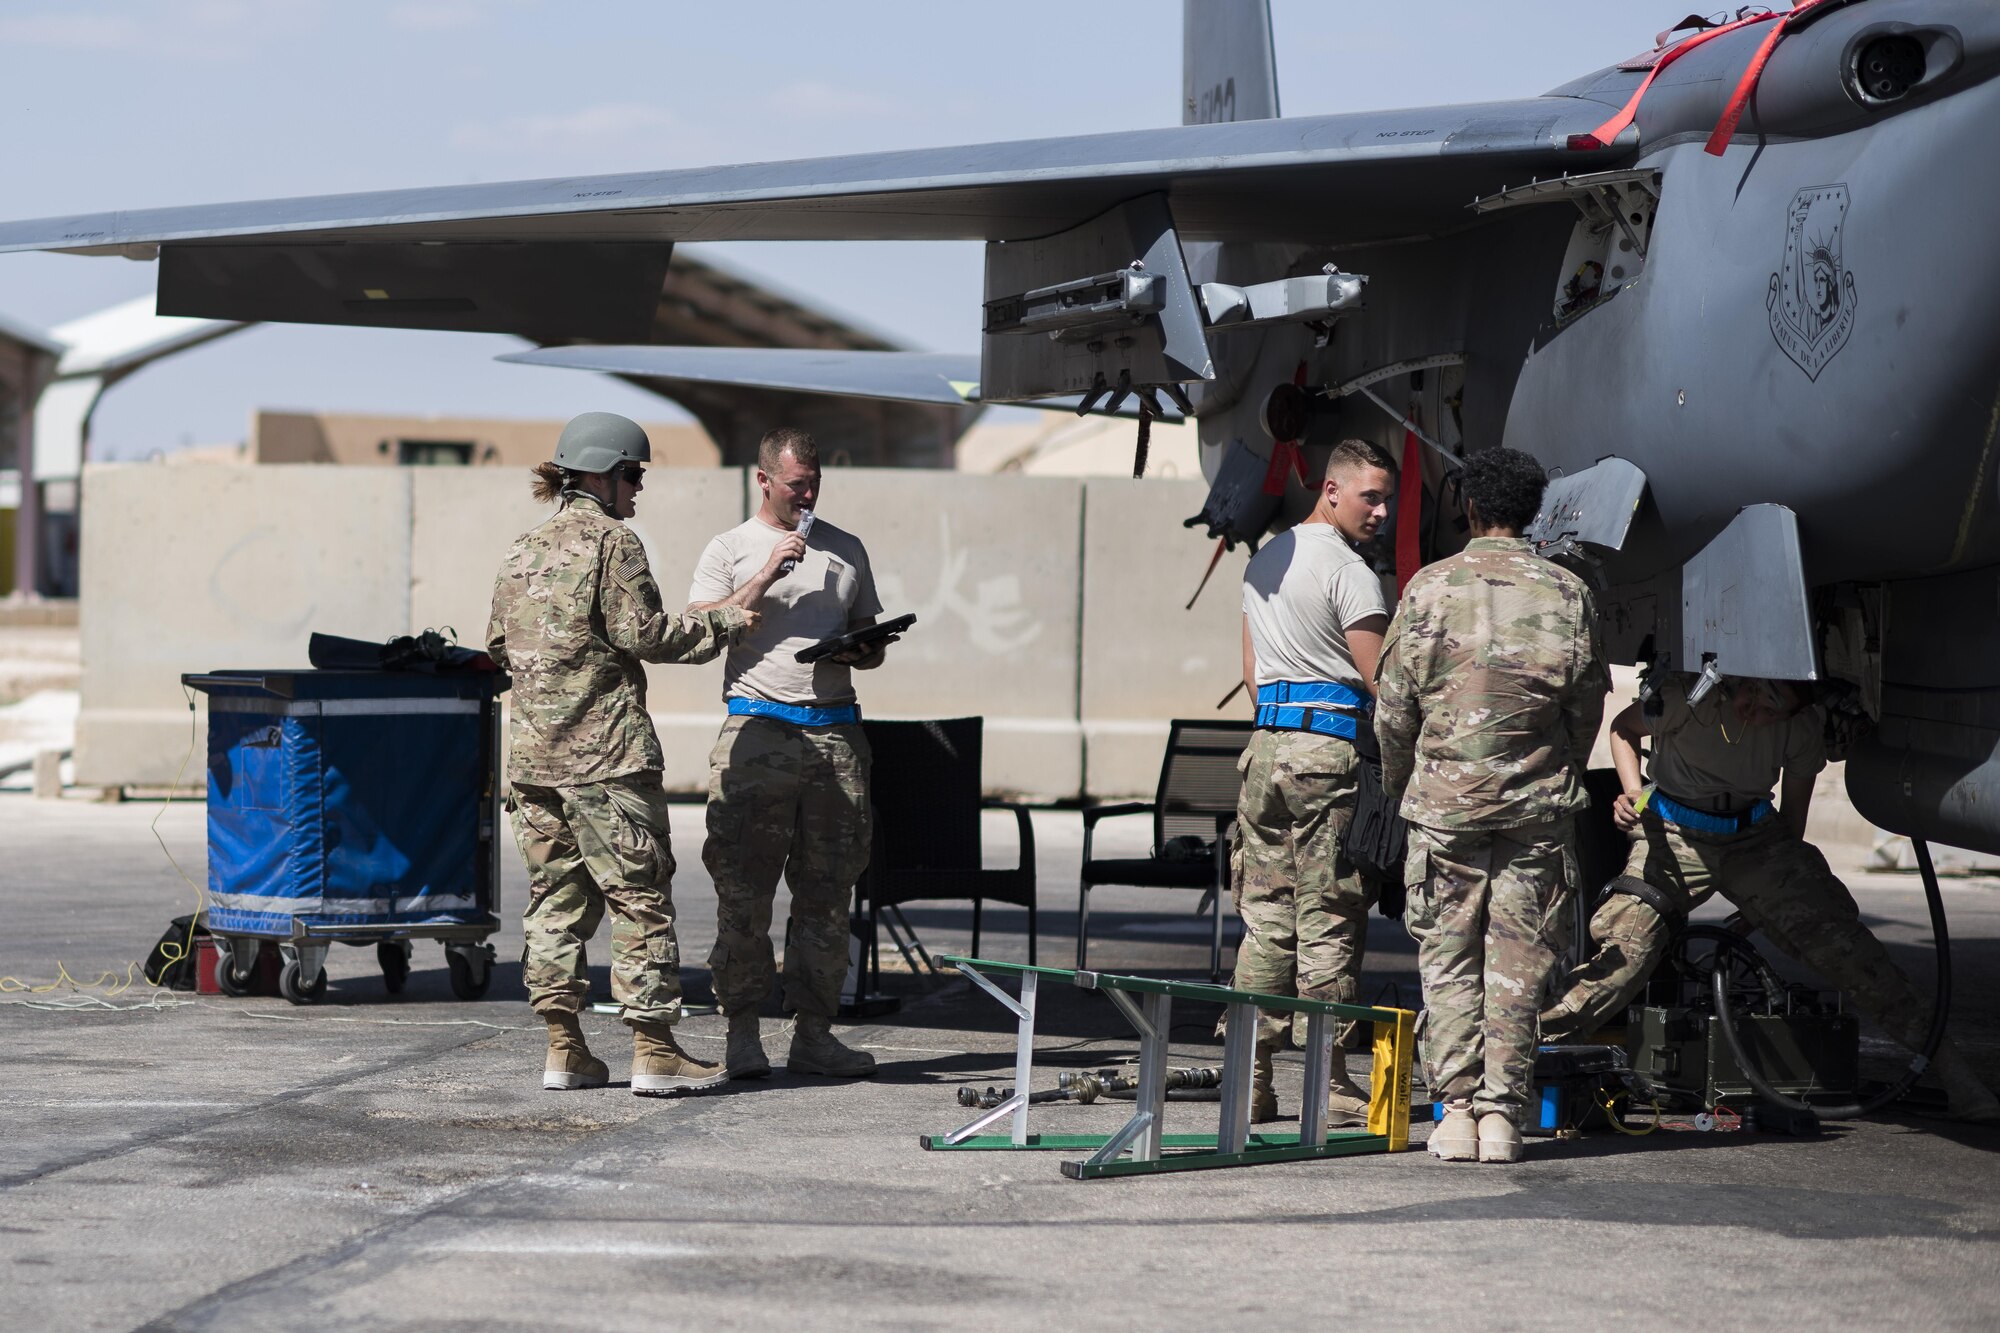 Tech Sgt. Nikki Webb, 332nd Air Expeditionary Wing Airmen ministry center non-commissioned officer in charge, hands out freeze pops to Airmen working on the flight line, June 2, 2017, in Southwest Asia. Webb and other members of the religious support team deliver the frozen treats on Fridays to Airmen working throughout the installation. (U.S. Air Force photo/Senior Airman Damon Kasberg)